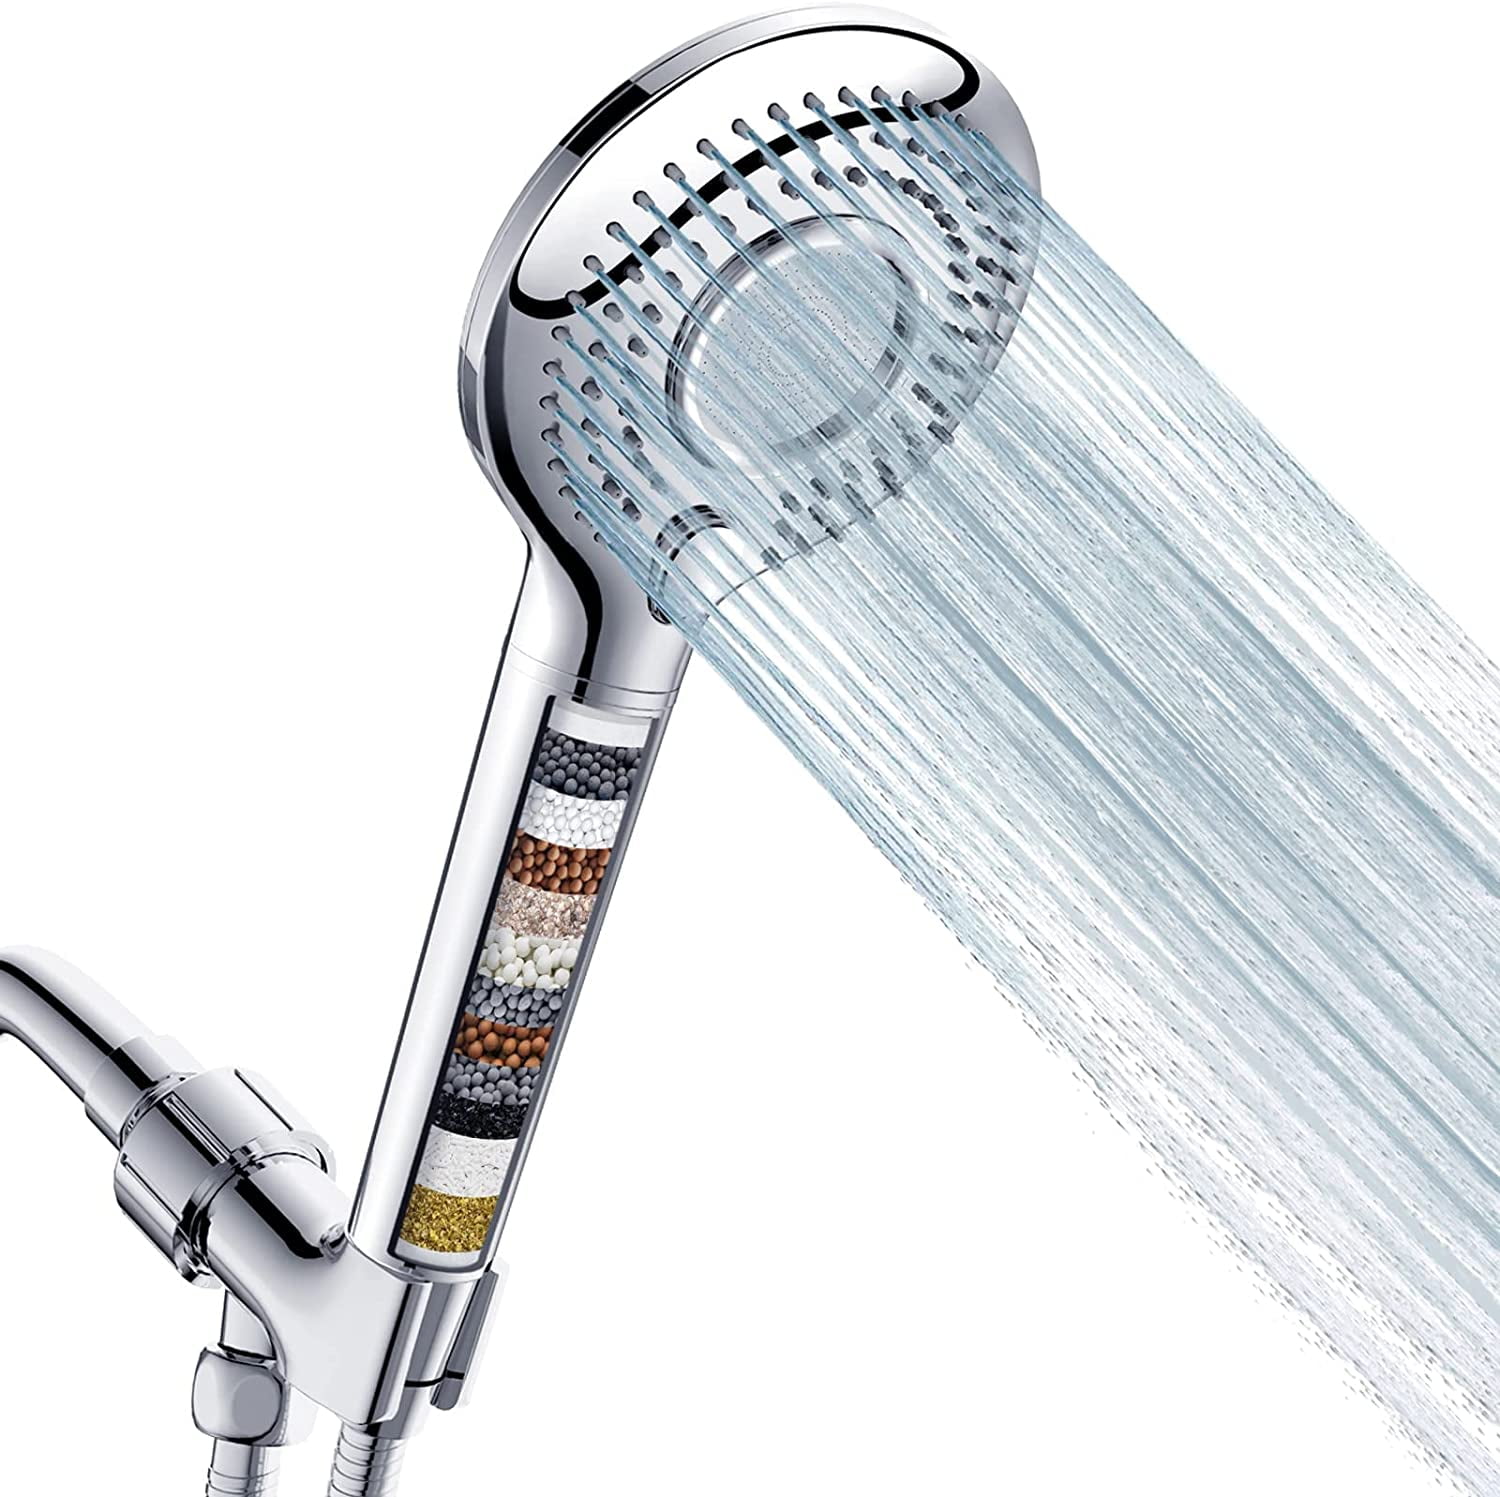 PureAction Wall Mounted Filtered Shower Head with 3 High Pressure